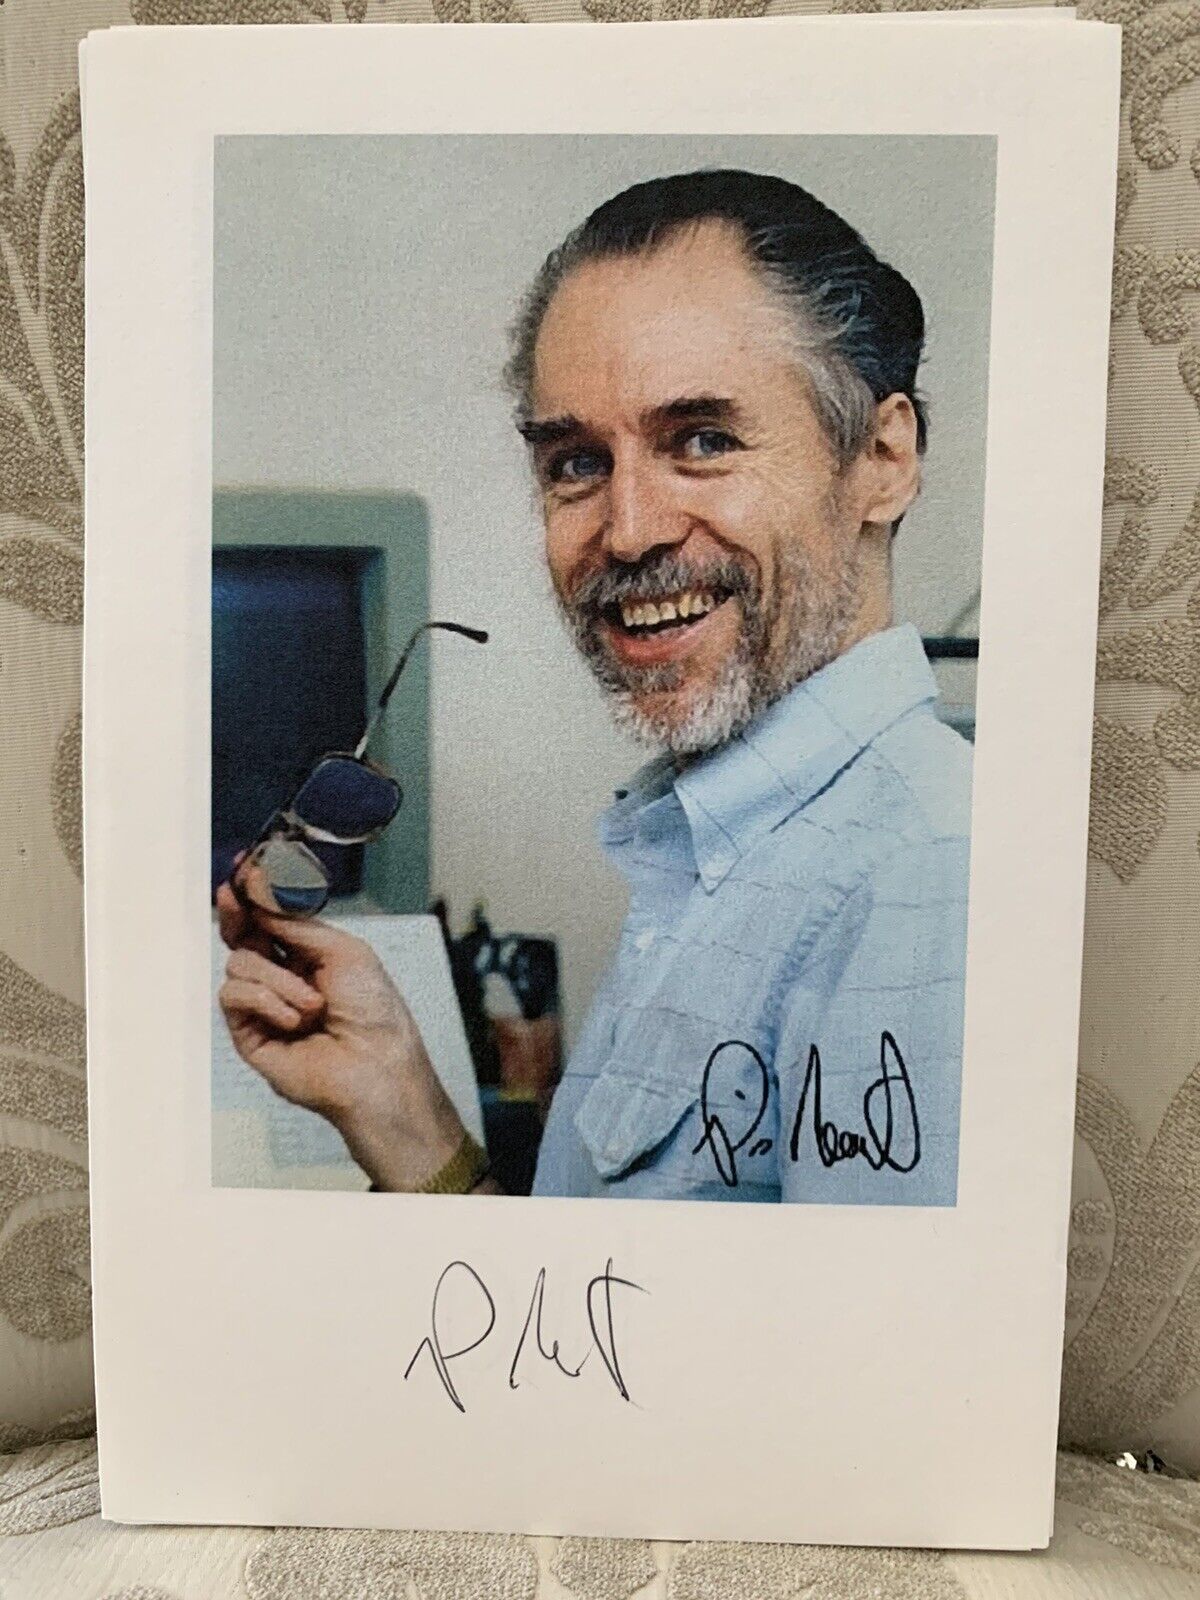 Piers Anthony Author Signed Photo Autographed New